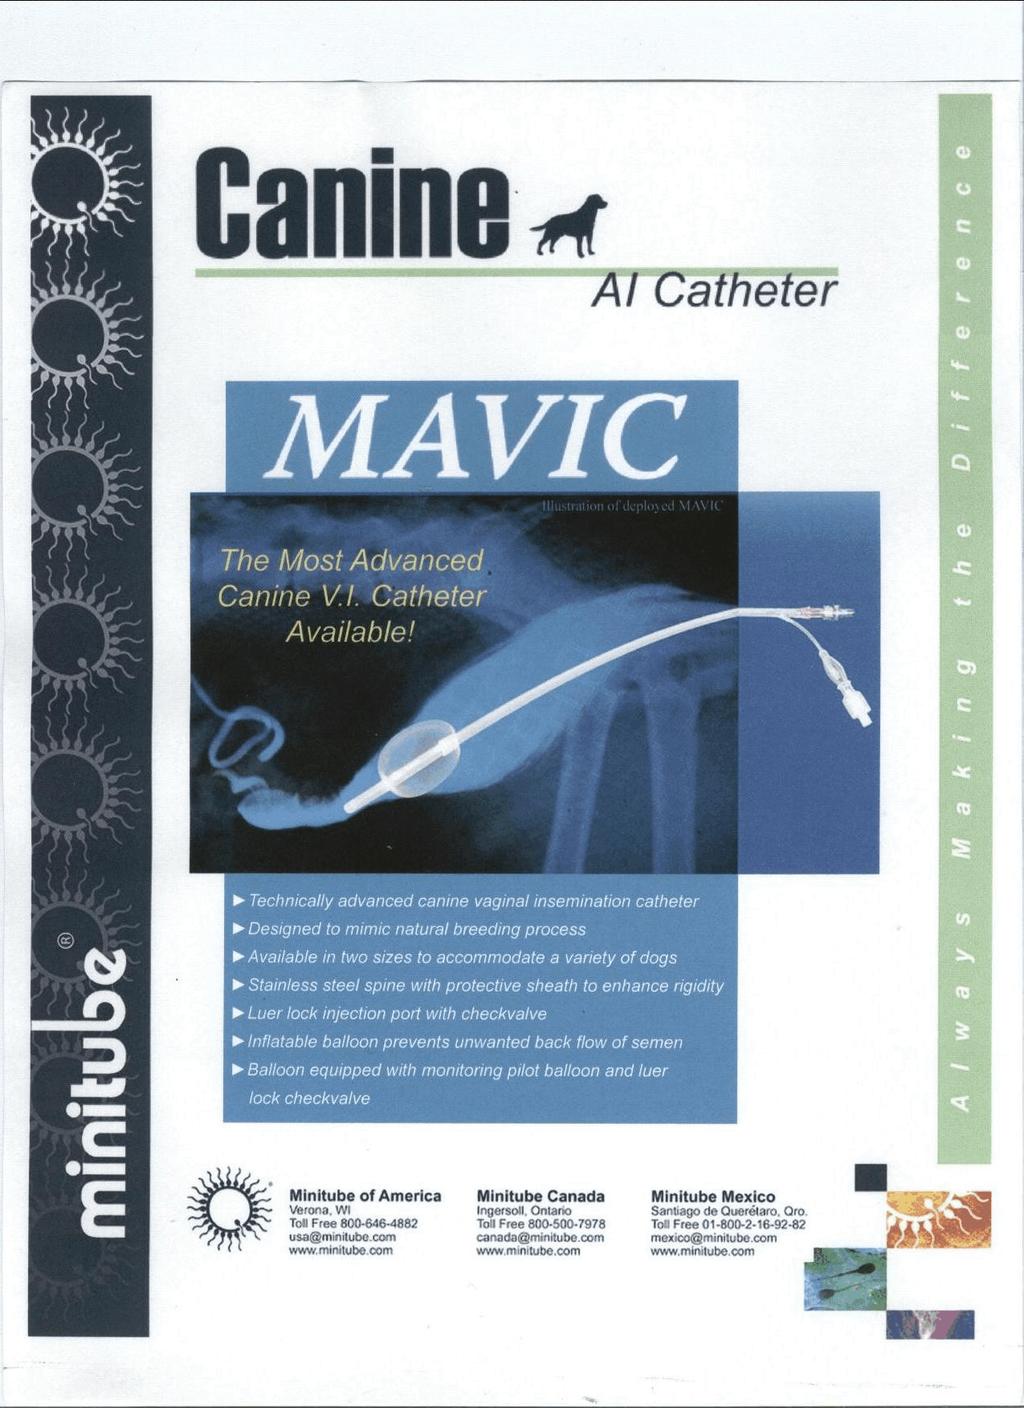 Minitube will be introducing a new AI Catheter called Mavic - The New Standard in AI Catheters For more